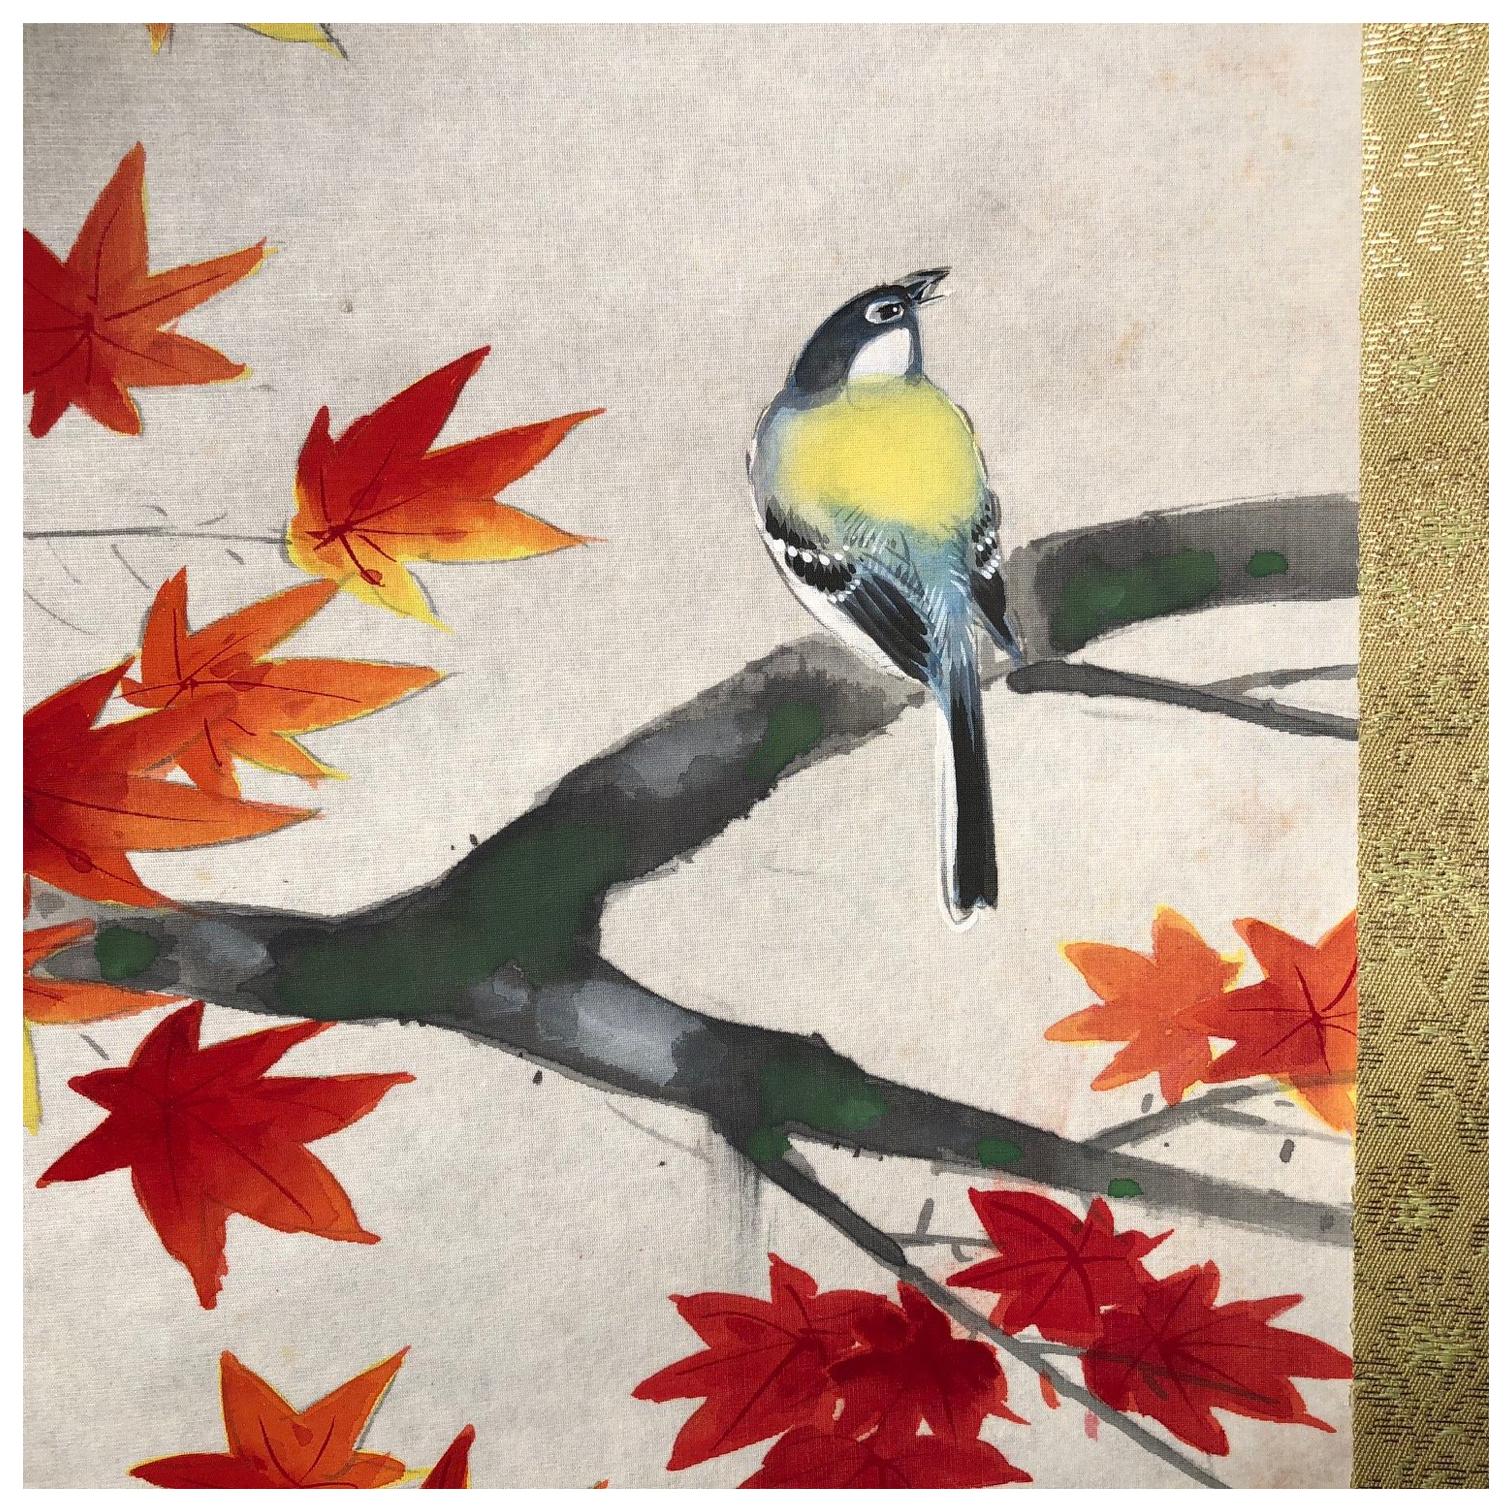  Japanese Hand-Painted Silk Scroll Gold Finch and Maples